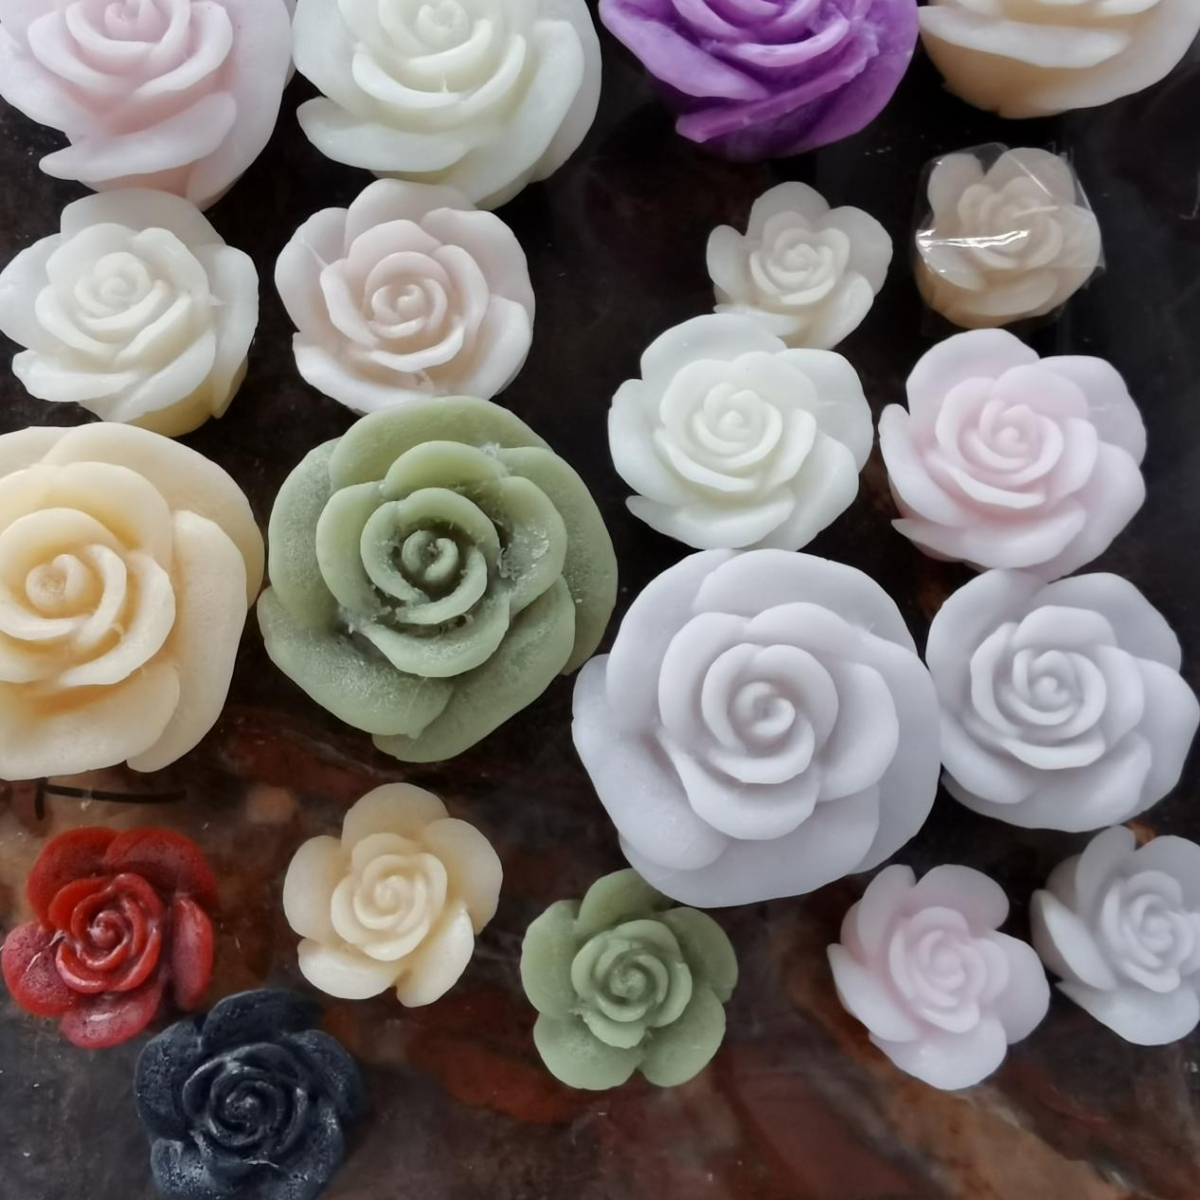 Rosa Chinensis Flower Shaped Candles -Best Soy Wax, Vegan Candles, China Factory ,Price-HOWCANDLE-Candles,Scented Candles,Aromatherapy Candles,Soy Candles,Vegan Candles,Jar Candles,Pillar Candles,Candle Gift Sets,Essential Oils,Reed Diffuser,Candle Holder,